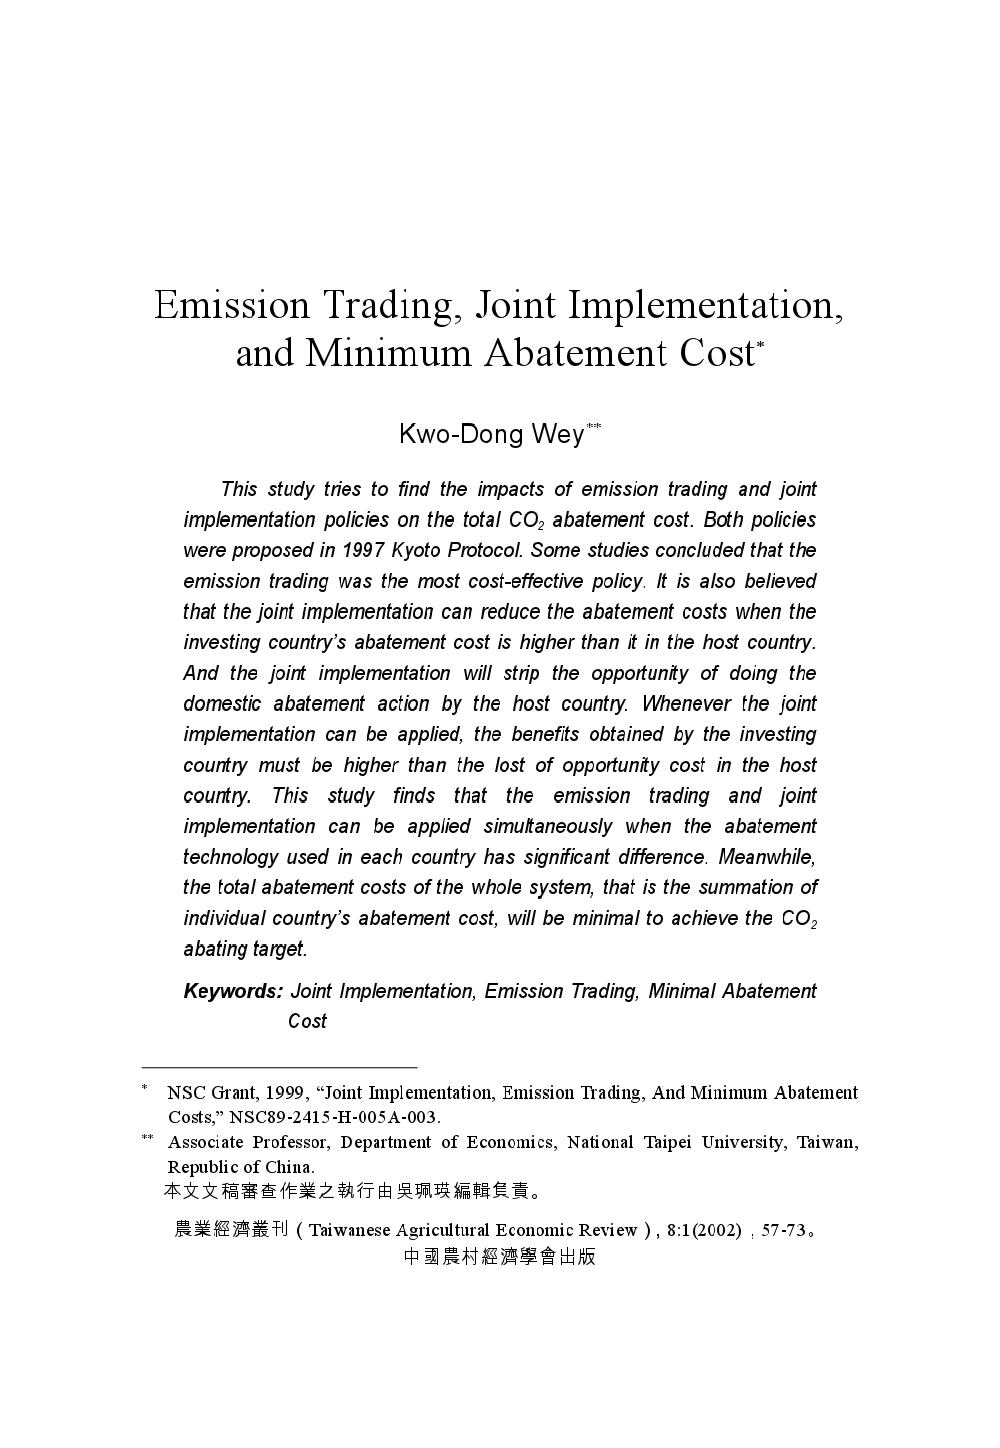 Emission_Trading__Joint_Implementation__and_Minimum_Abatement_Cost.jpg